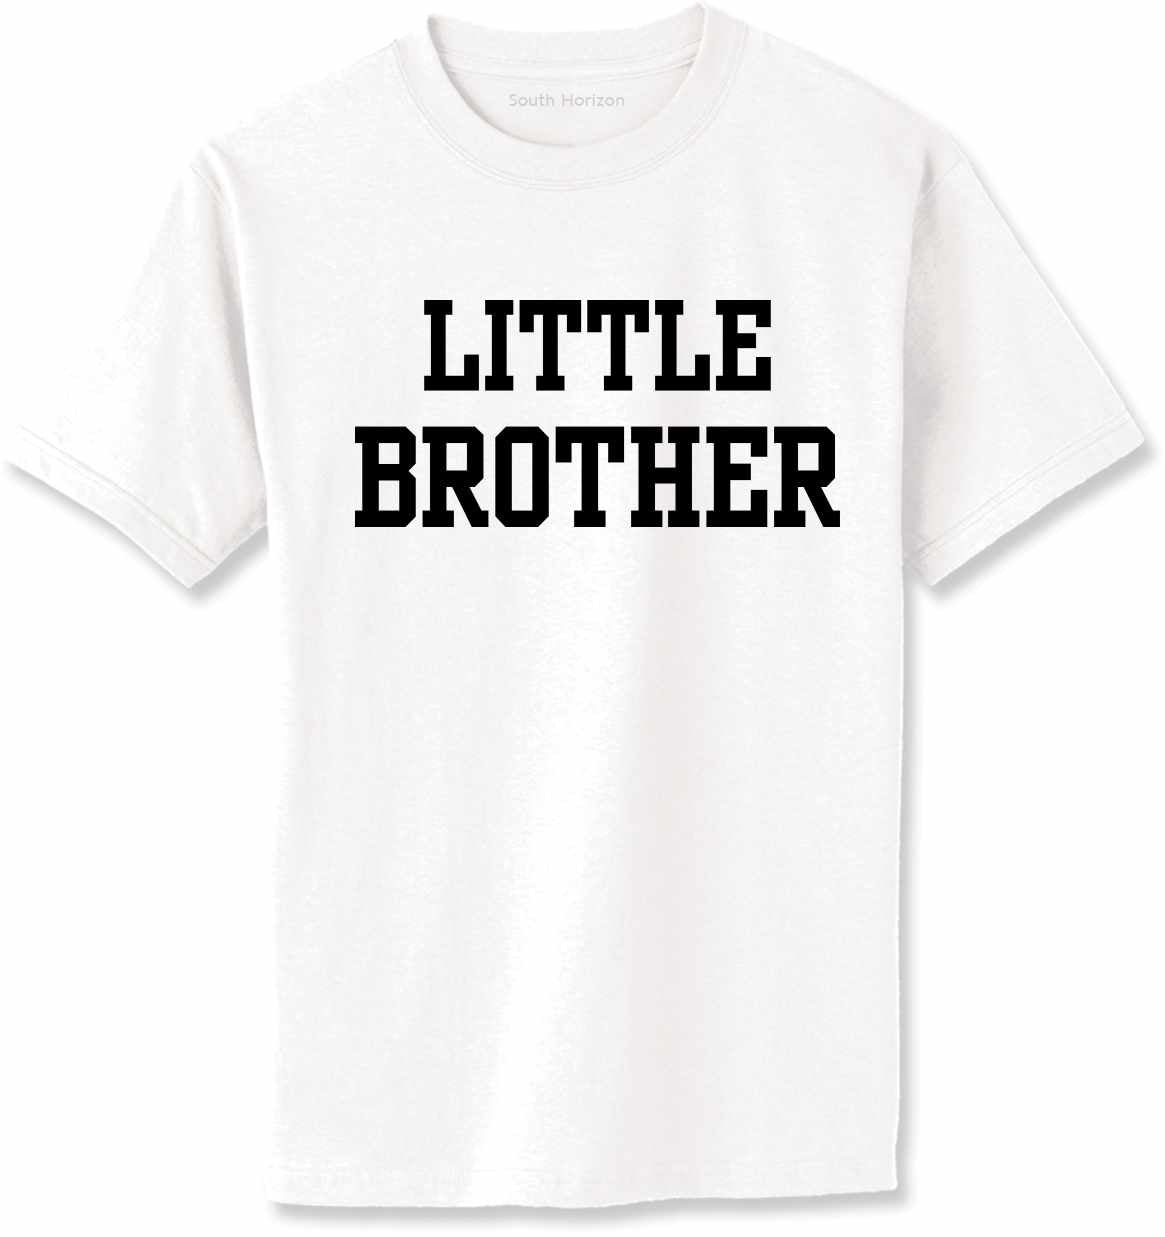 LITTLE BROTHER Adult T-Shirt (#1111-1)